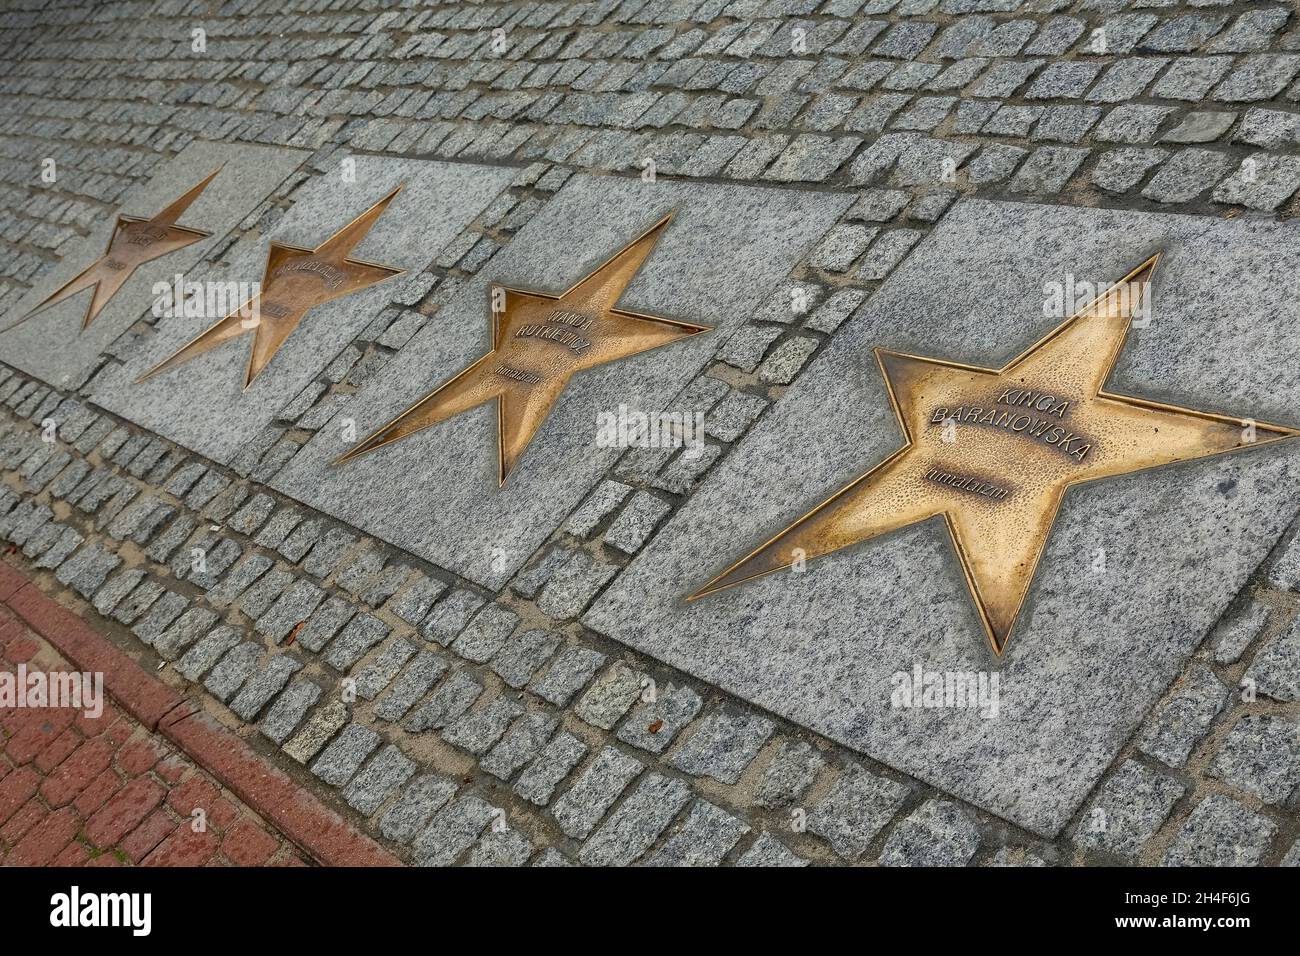 Wladyslawowo, Poland - September 12, 2014: The Stars made of bronze with the names of sportsmen on the Avenue of the Stars of Sport, created in 2000 Stock Photo